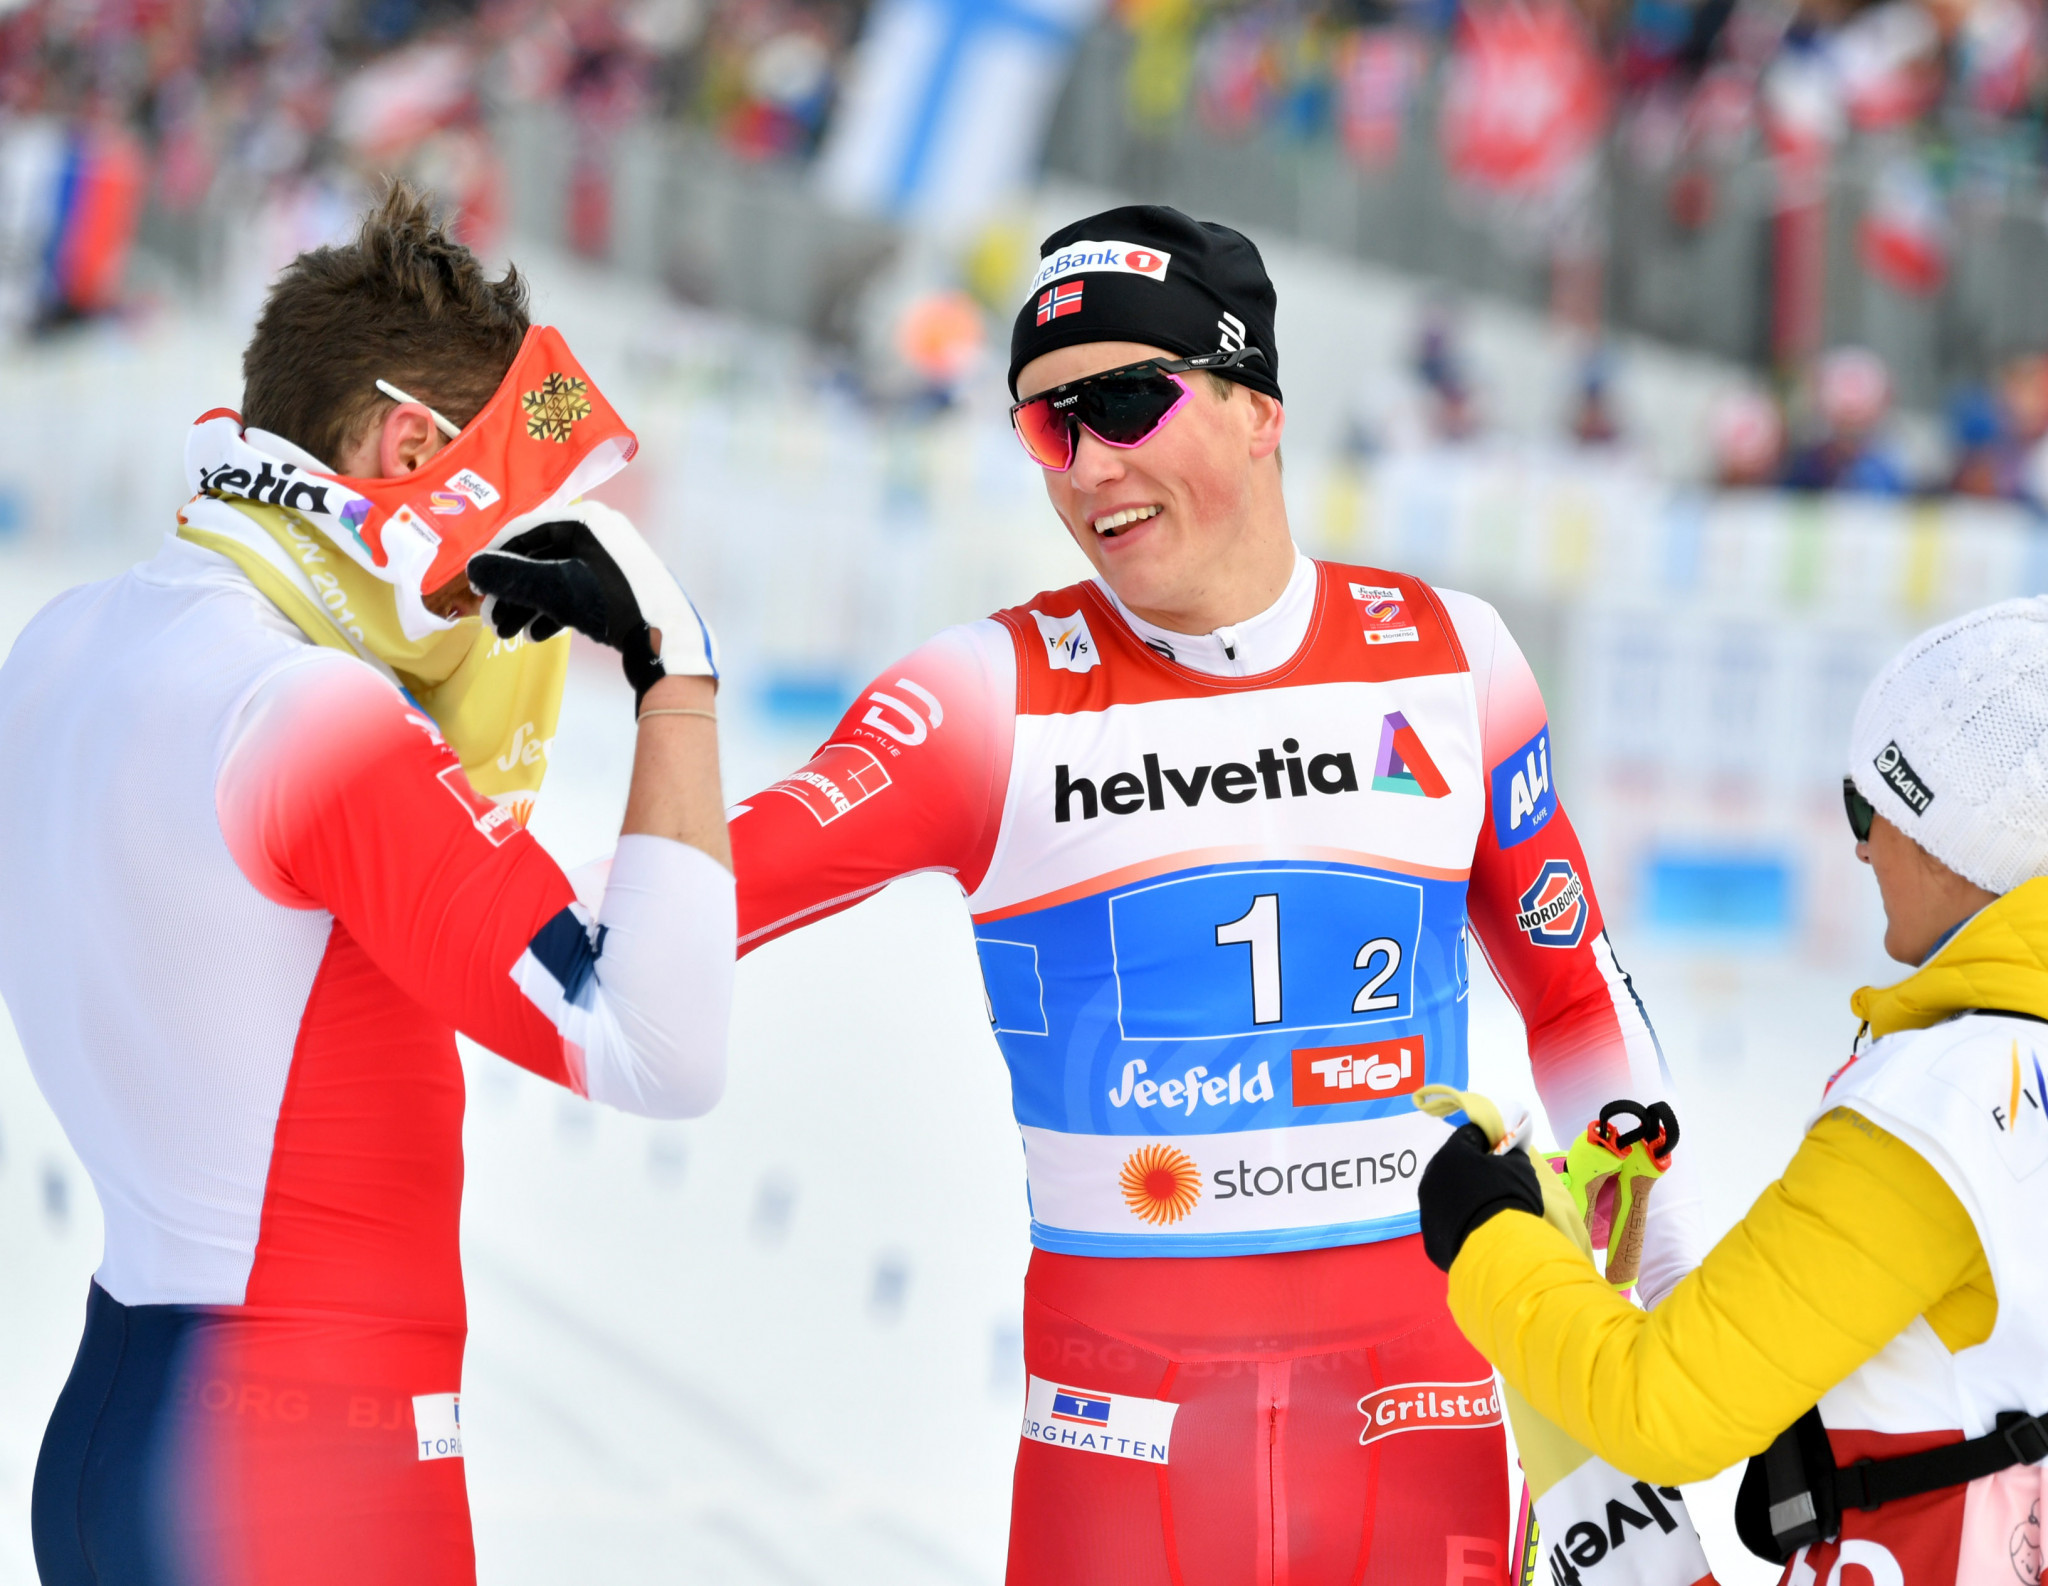 Emil Iversen and Johannes Hoesflot Klaebo emerged as the winners ©Getty Images